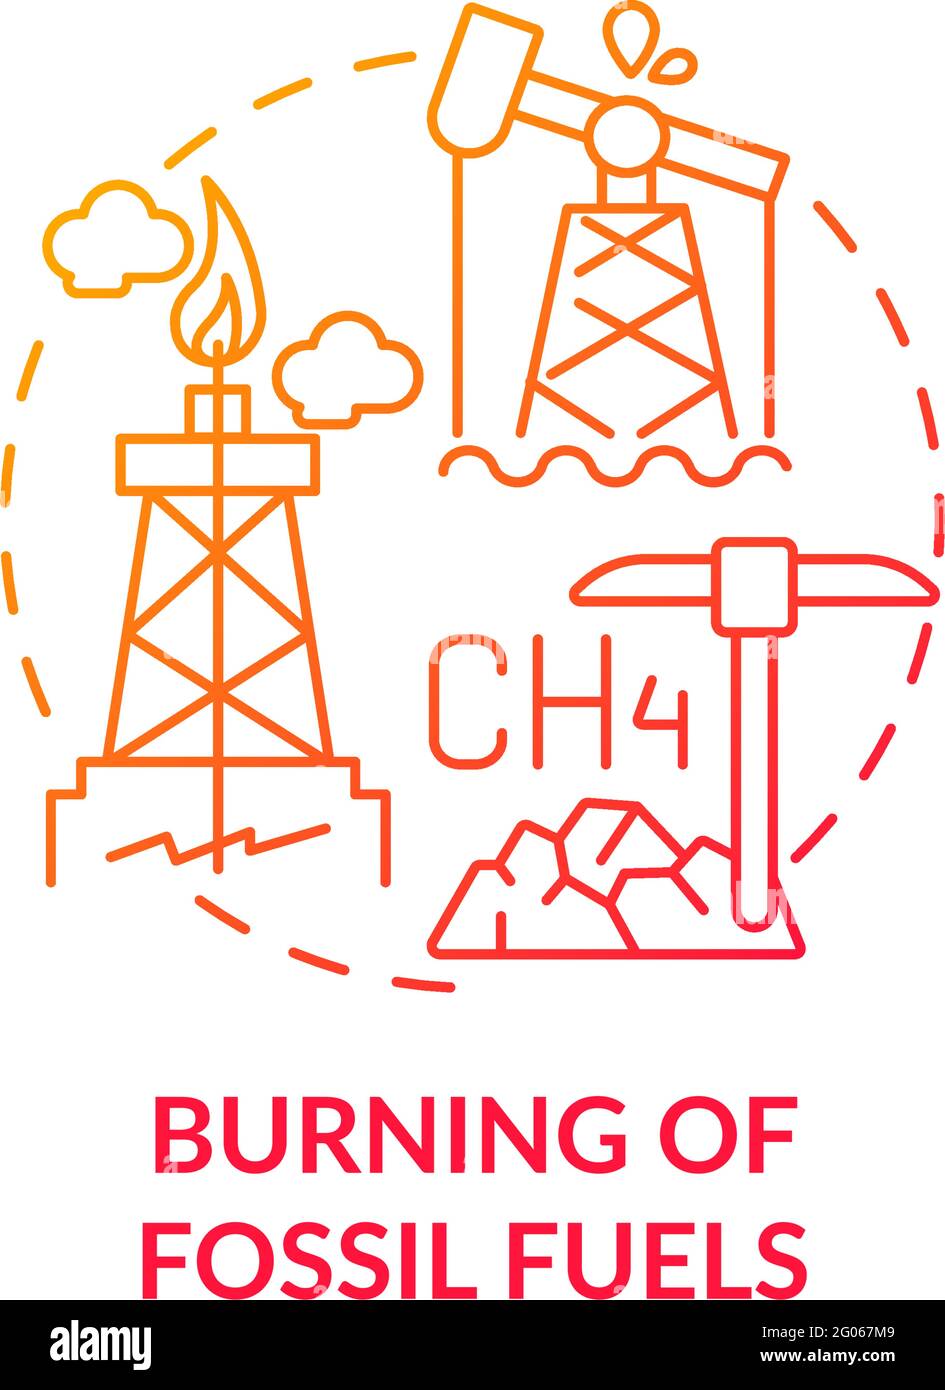 Fossil fuels burning concept icon Stock Vector